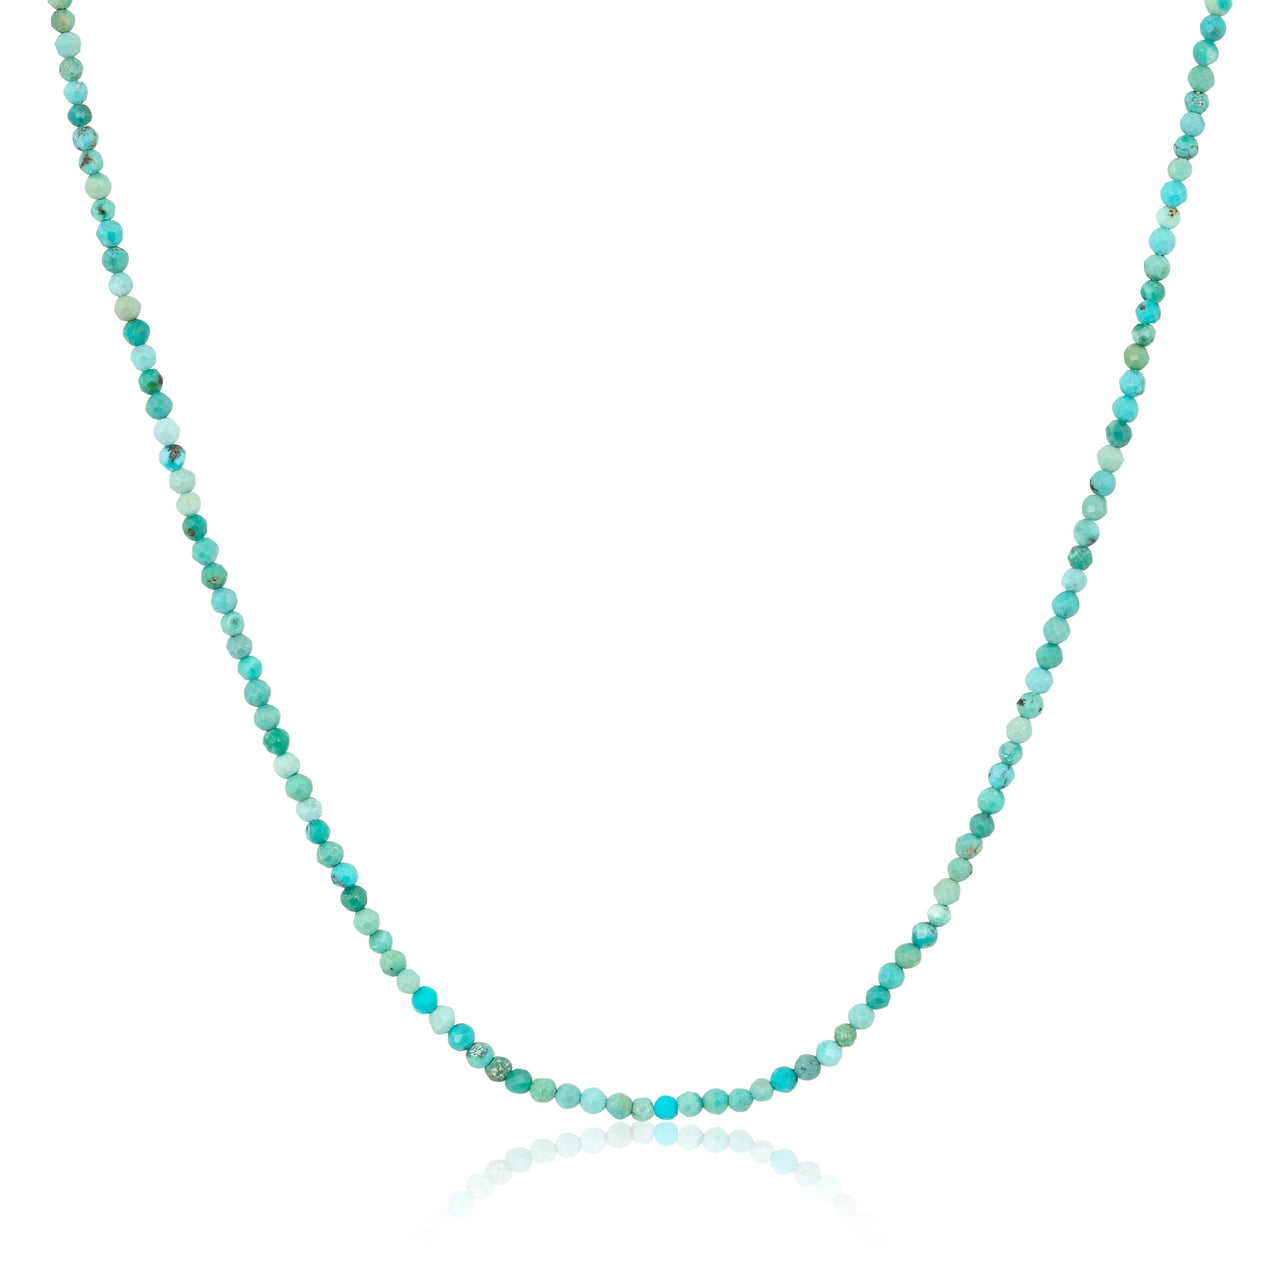 MINI CANDY NECKLACE - TURQUOISE